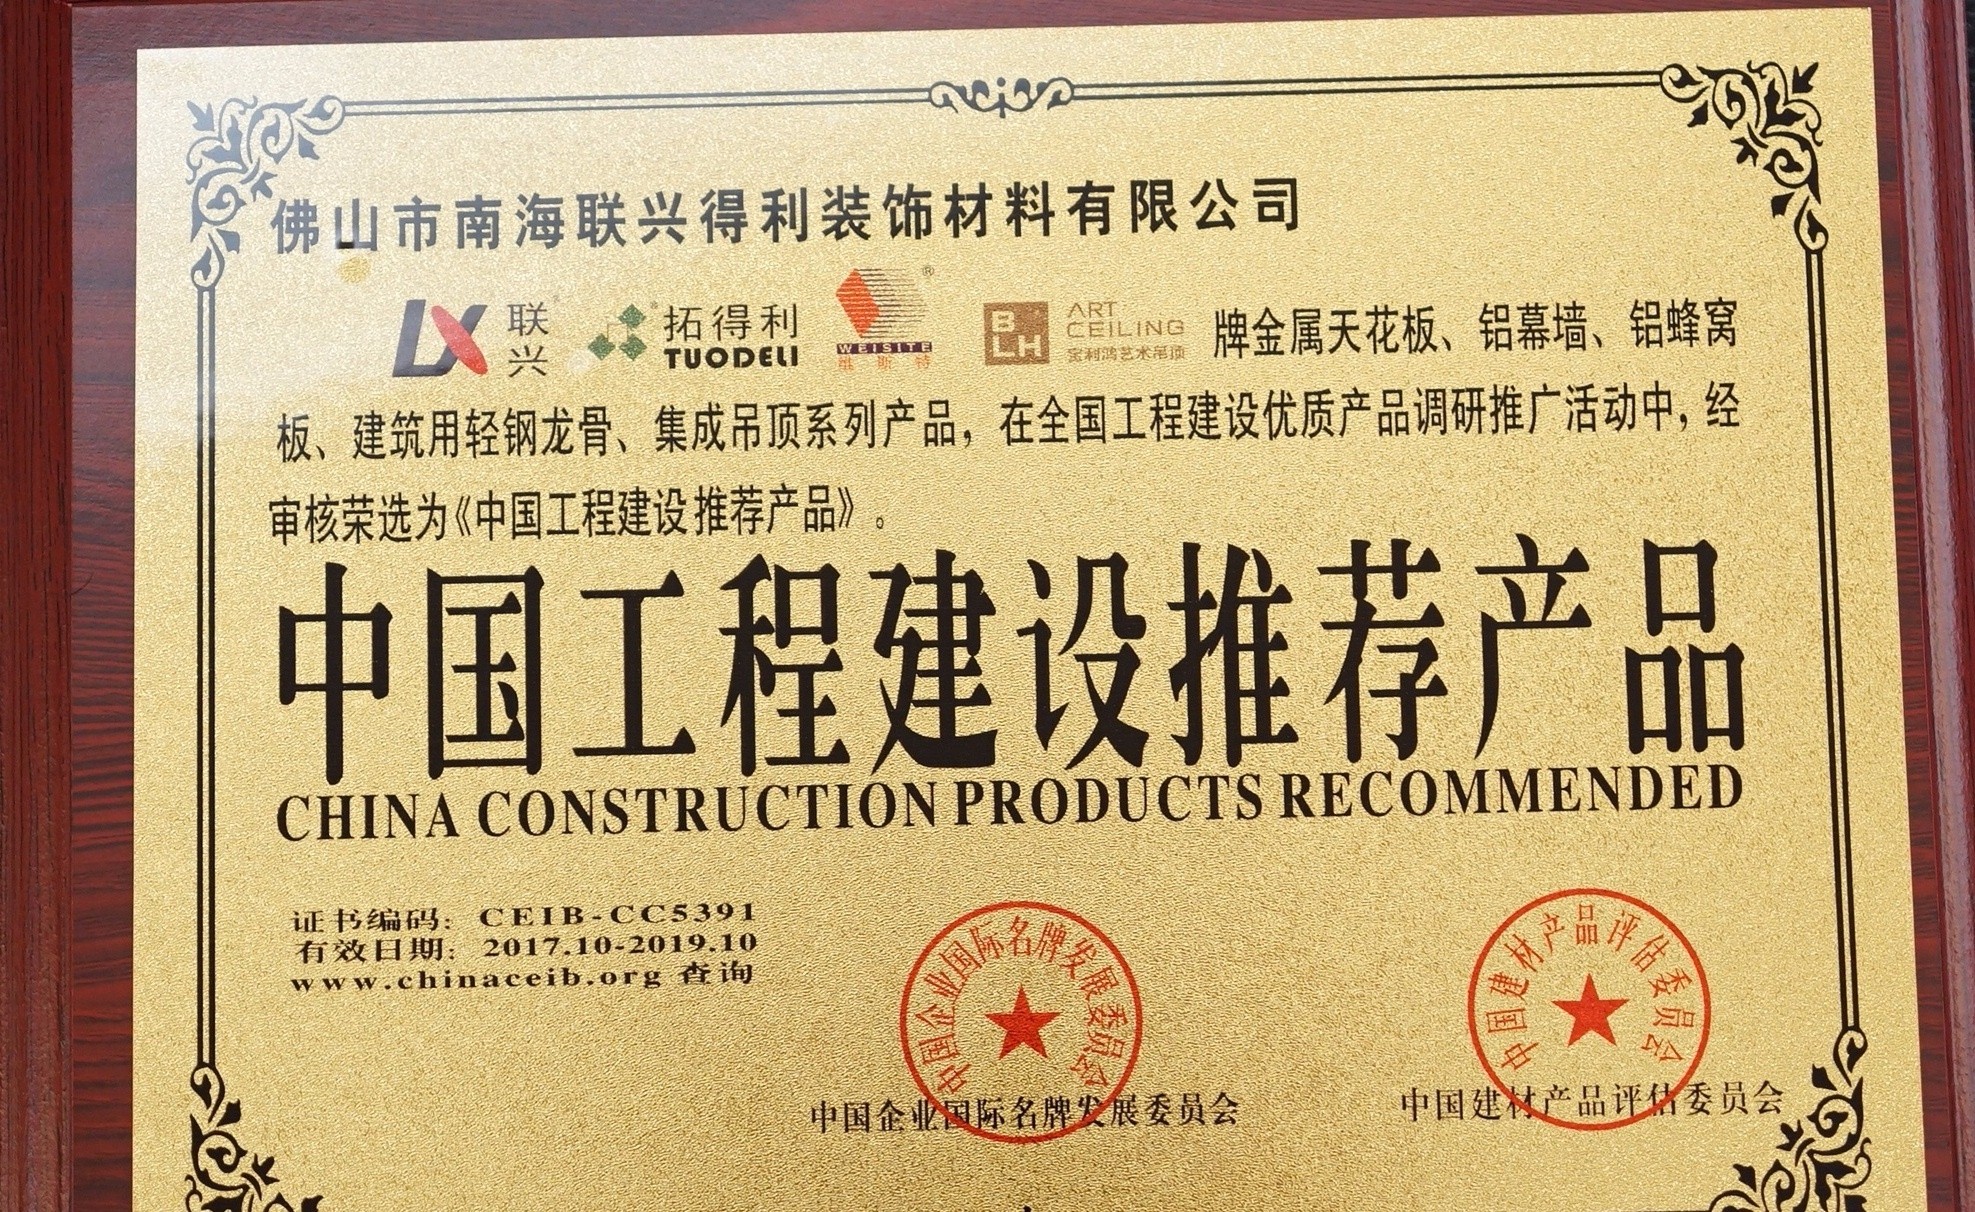 China Construction Products Recommended